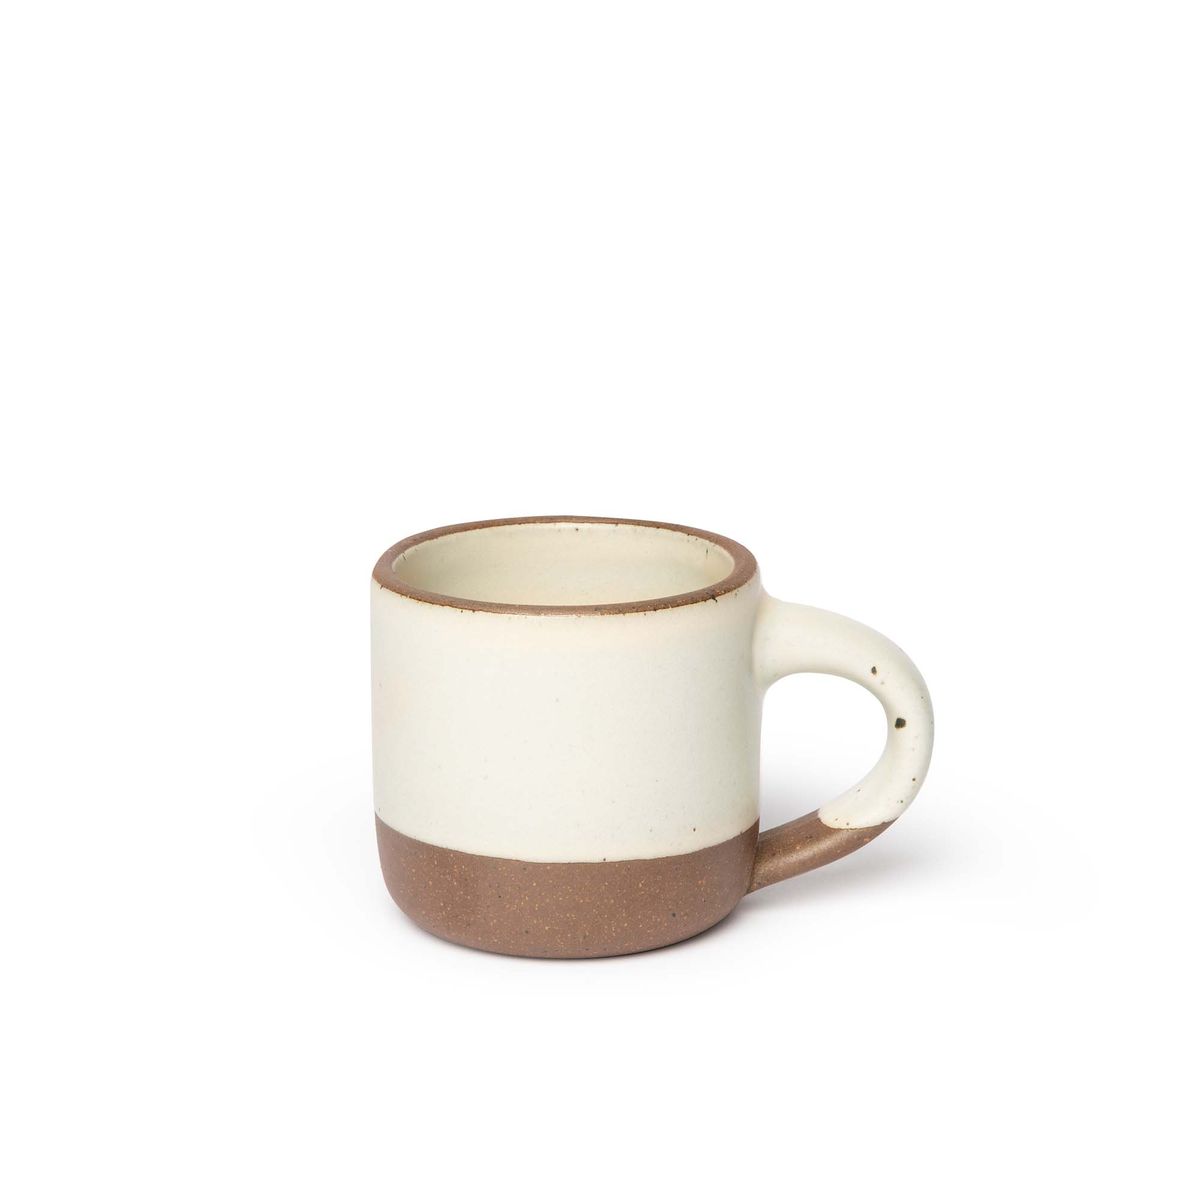 A small sized ceramic mug with handle in a warm, tan-toned, off-white glaze featuring iron speckles and unglazed rim and bottom base.